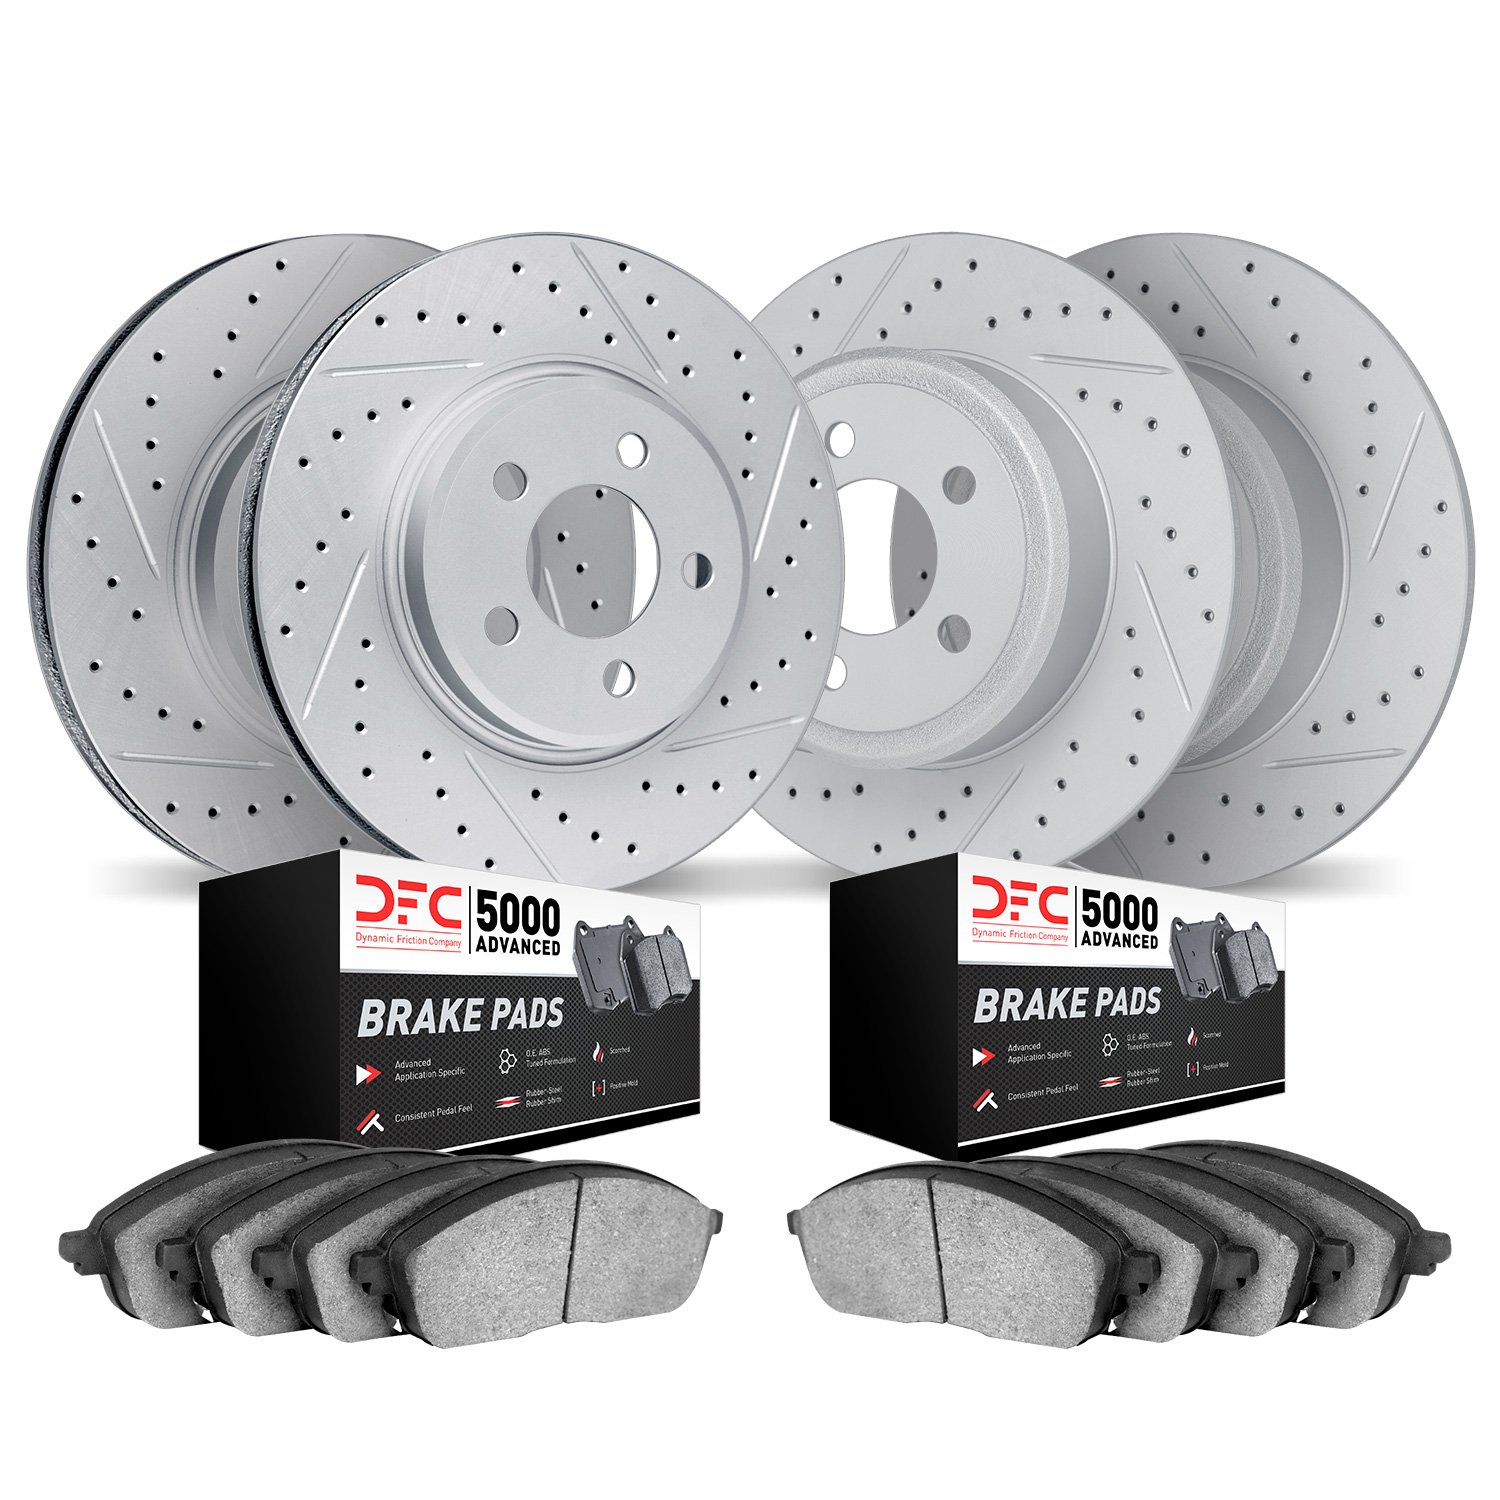 2504-07002 Geoperformance Drilled/Slotted Rotors w/5000 Advanced Brake Pads Kit, 2014-2019 Mopar, Position: Front and Rear